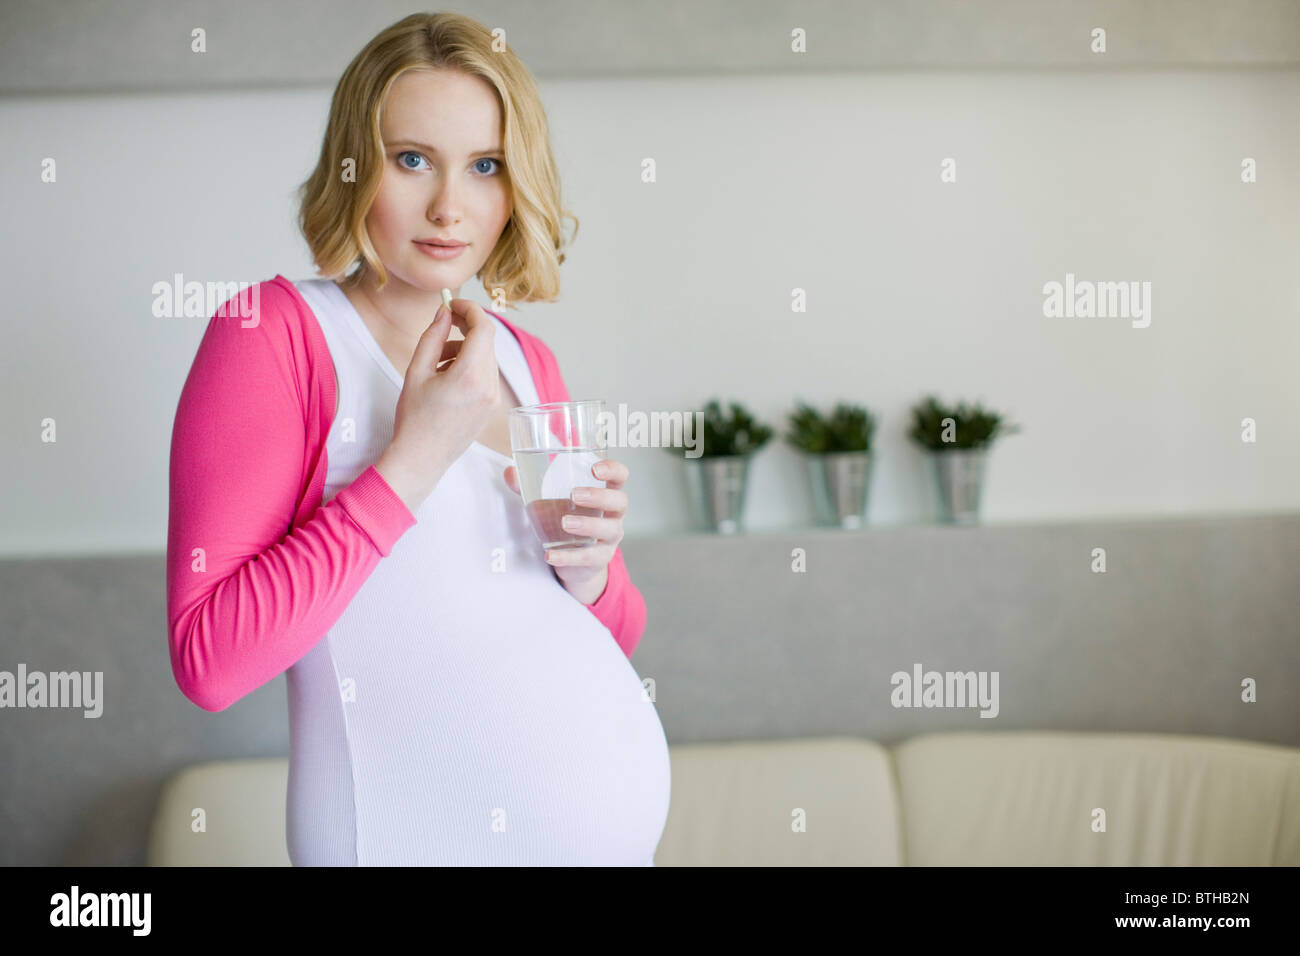 pregnant woman with medicines Stock Photo